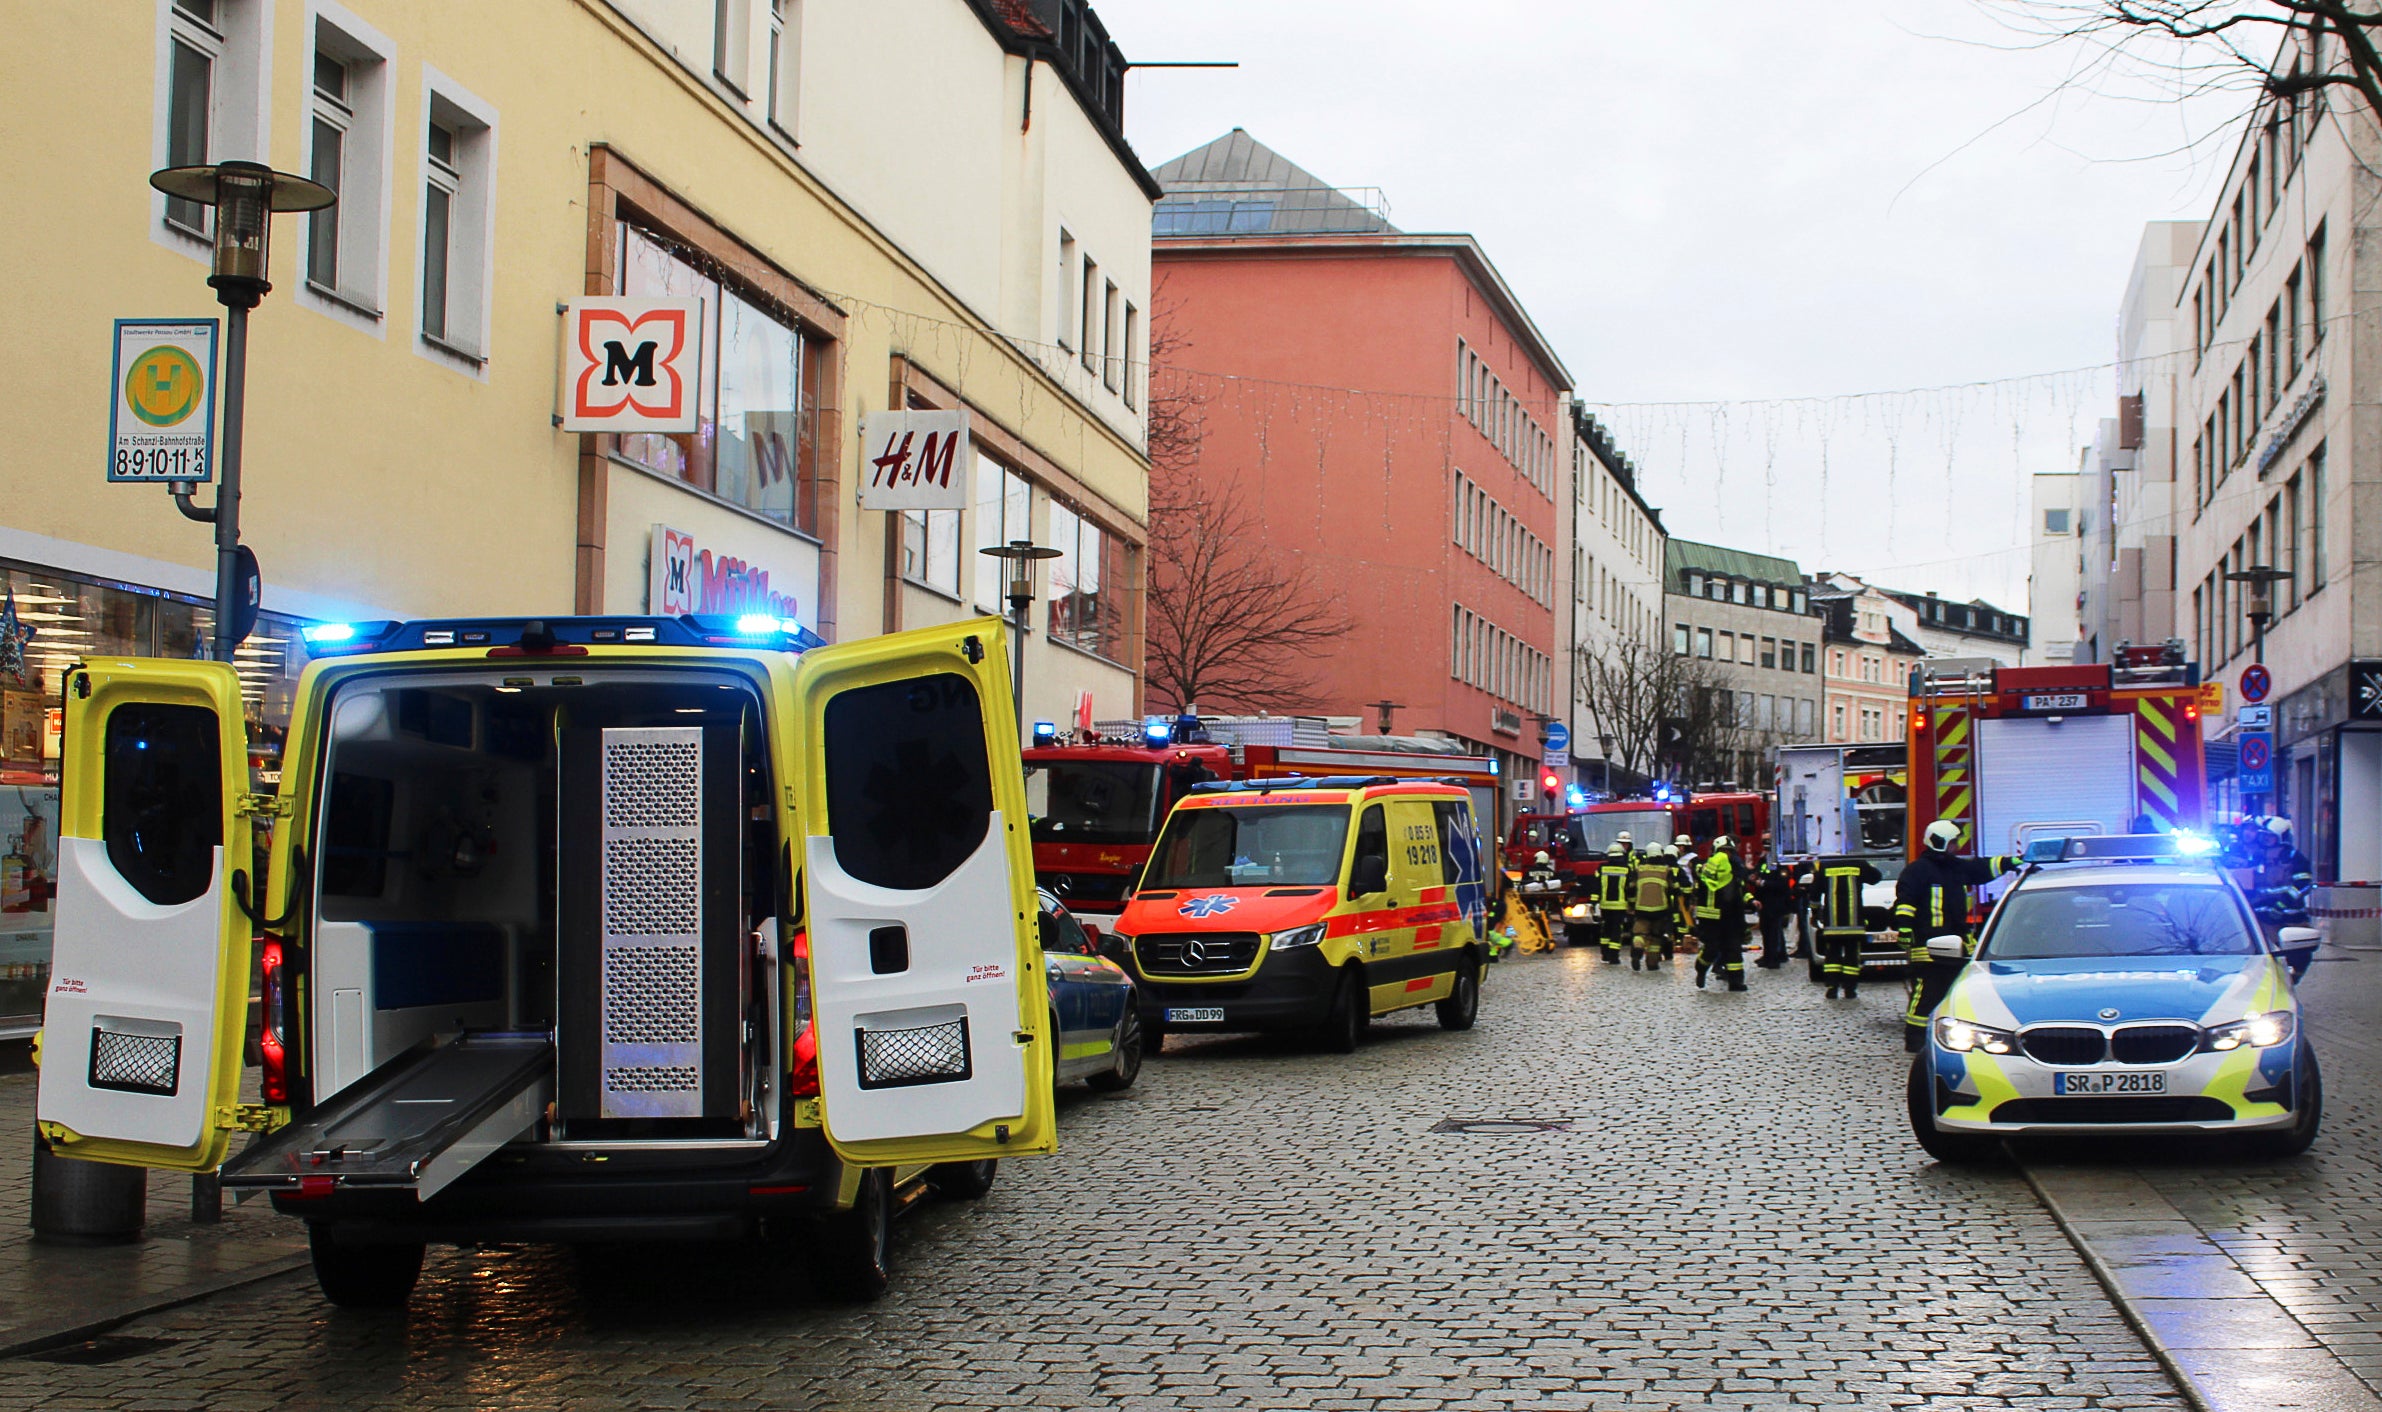 Emergency services from the police, fire department and ambulance stand at the scene of an accident in the city center in Passau, Germany